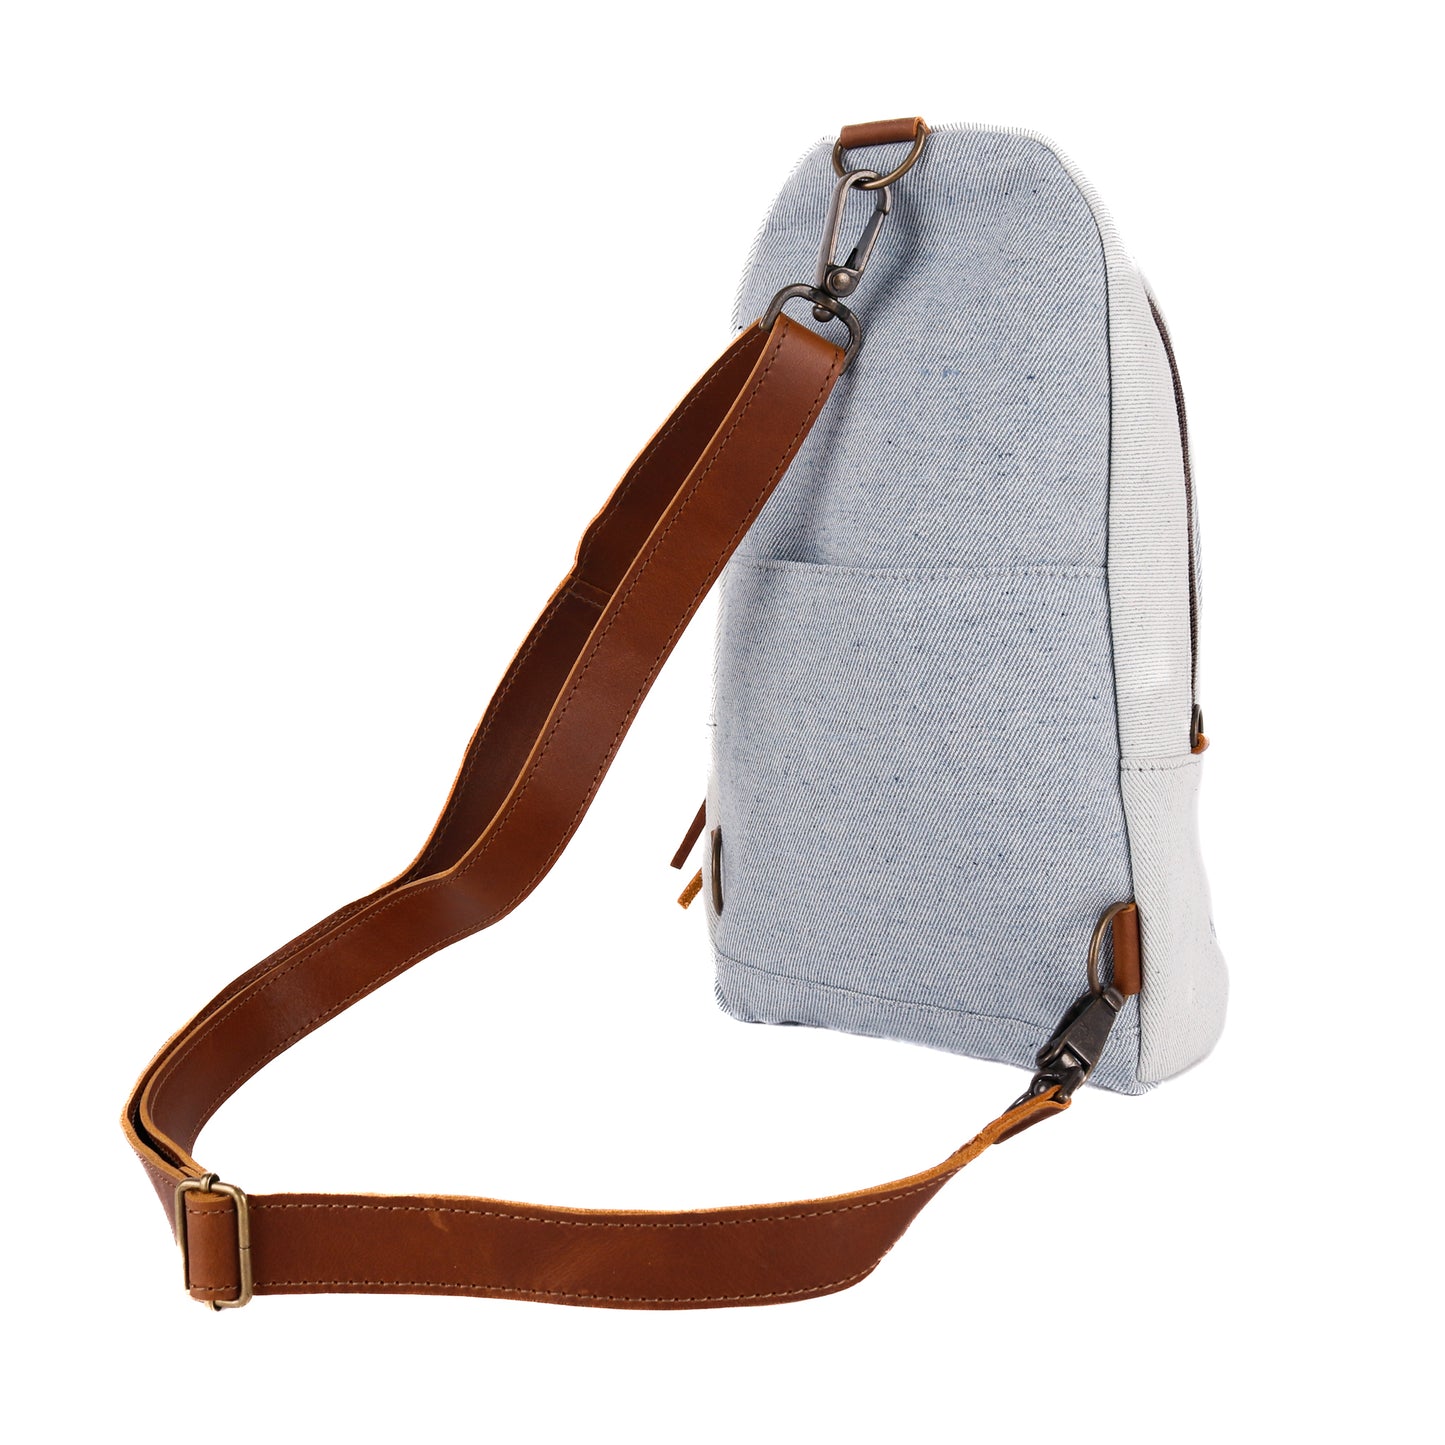 CROSSBODY SLING 2.0 - UPCYCLED DENIM WITH PATCH - CAFE - NO. 11339